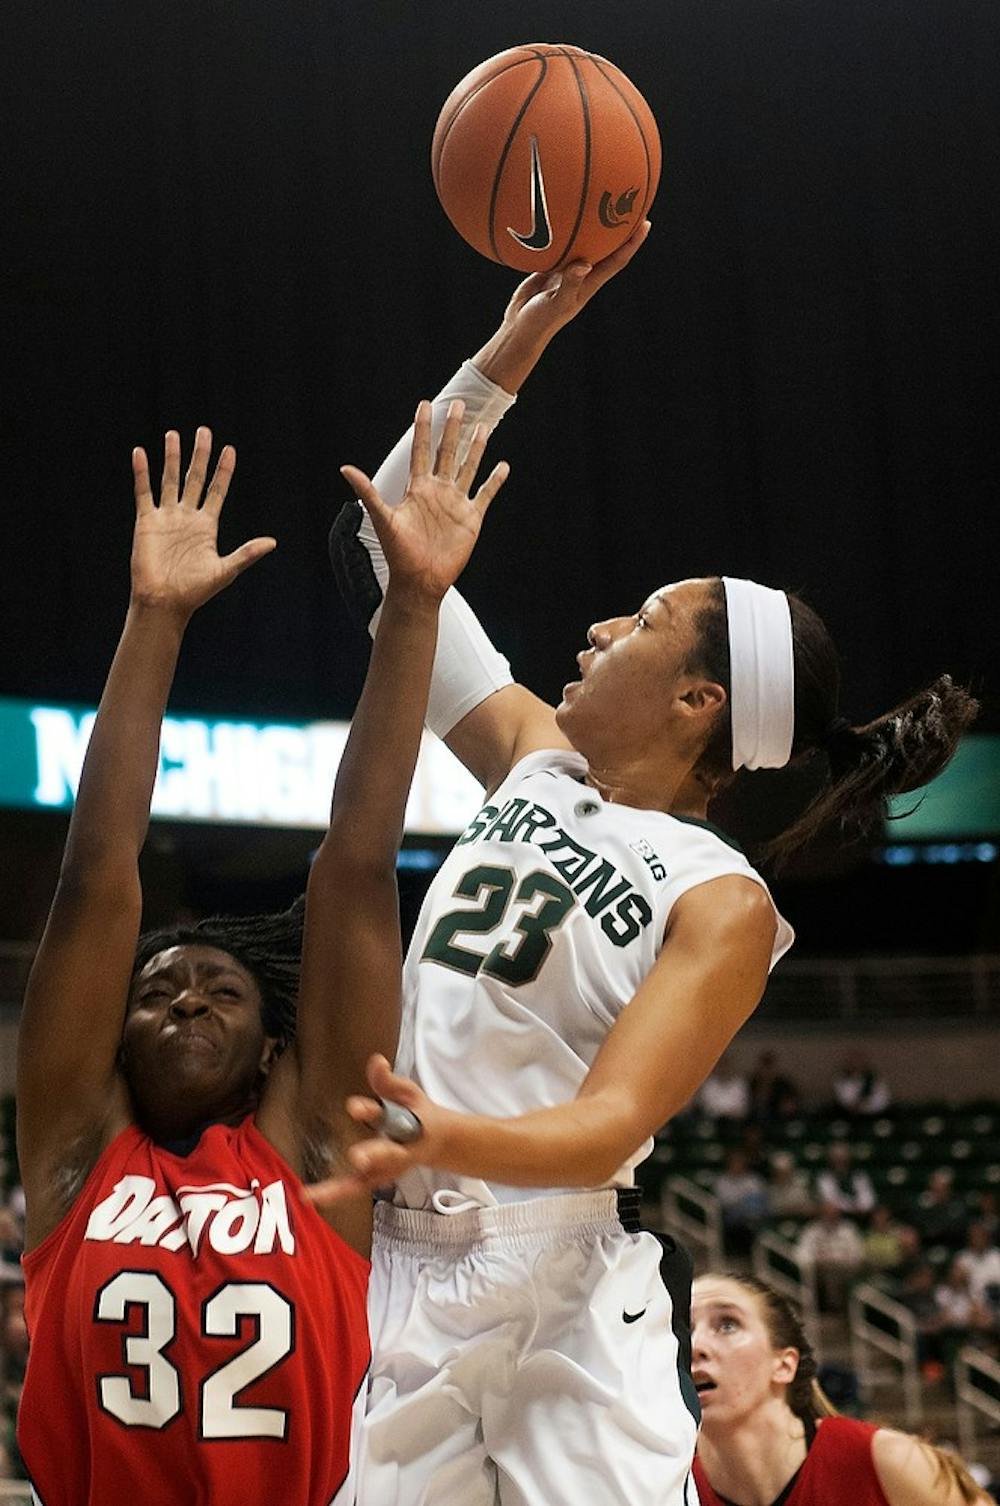 	<p>Freshman guard Aerial Powers takes a shot over Dayton guard Tiffany Johnson on Nov. 17, 2013, at Breslin Center. <span class="caps">MSU</span> defeated Dayton in overtime, 96-89. Brian Palmer/The State News</p>